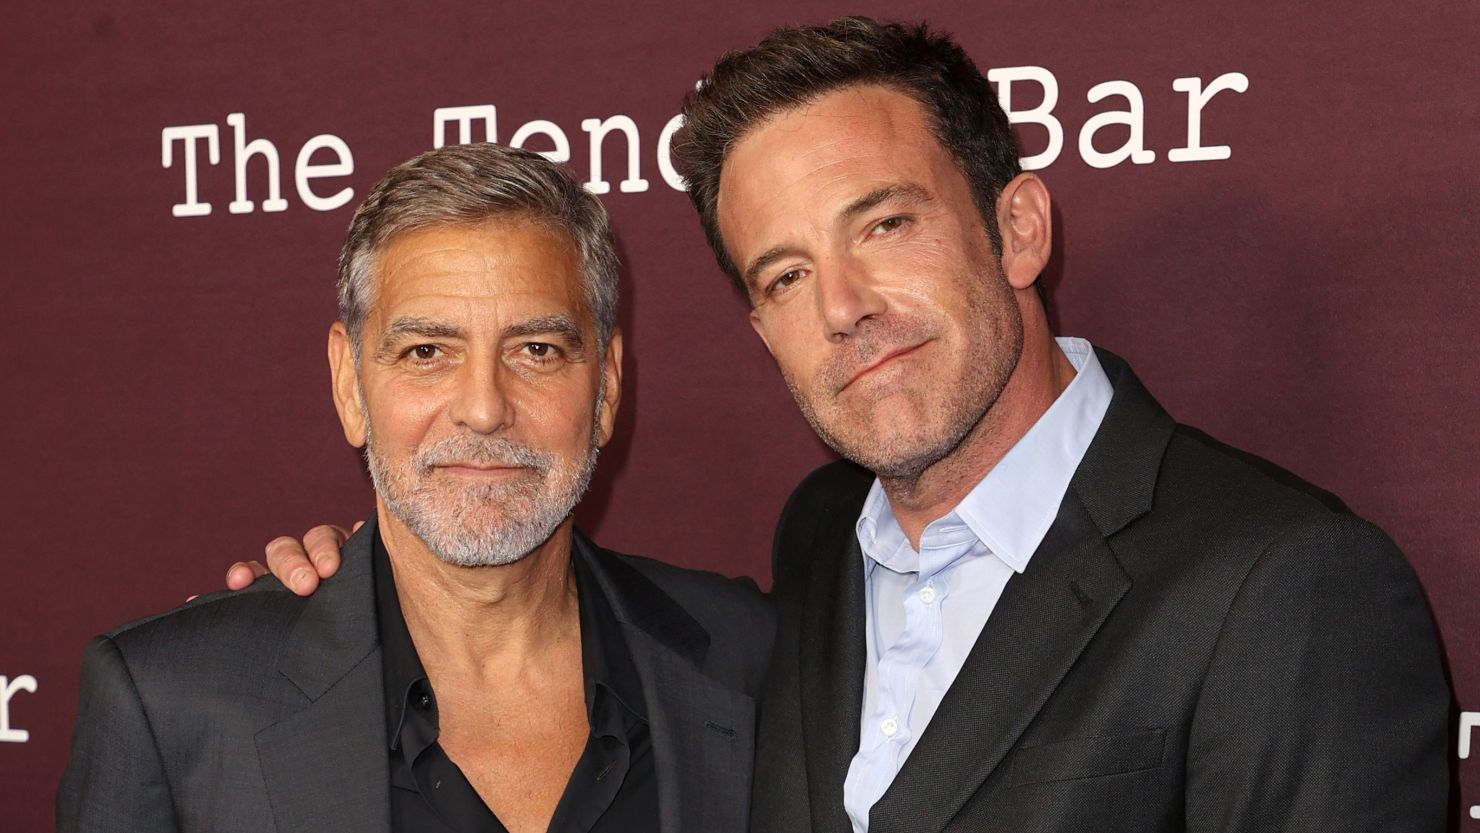 George Clooney and Ben Affleck at the premiere of their film "The Tender Bar."